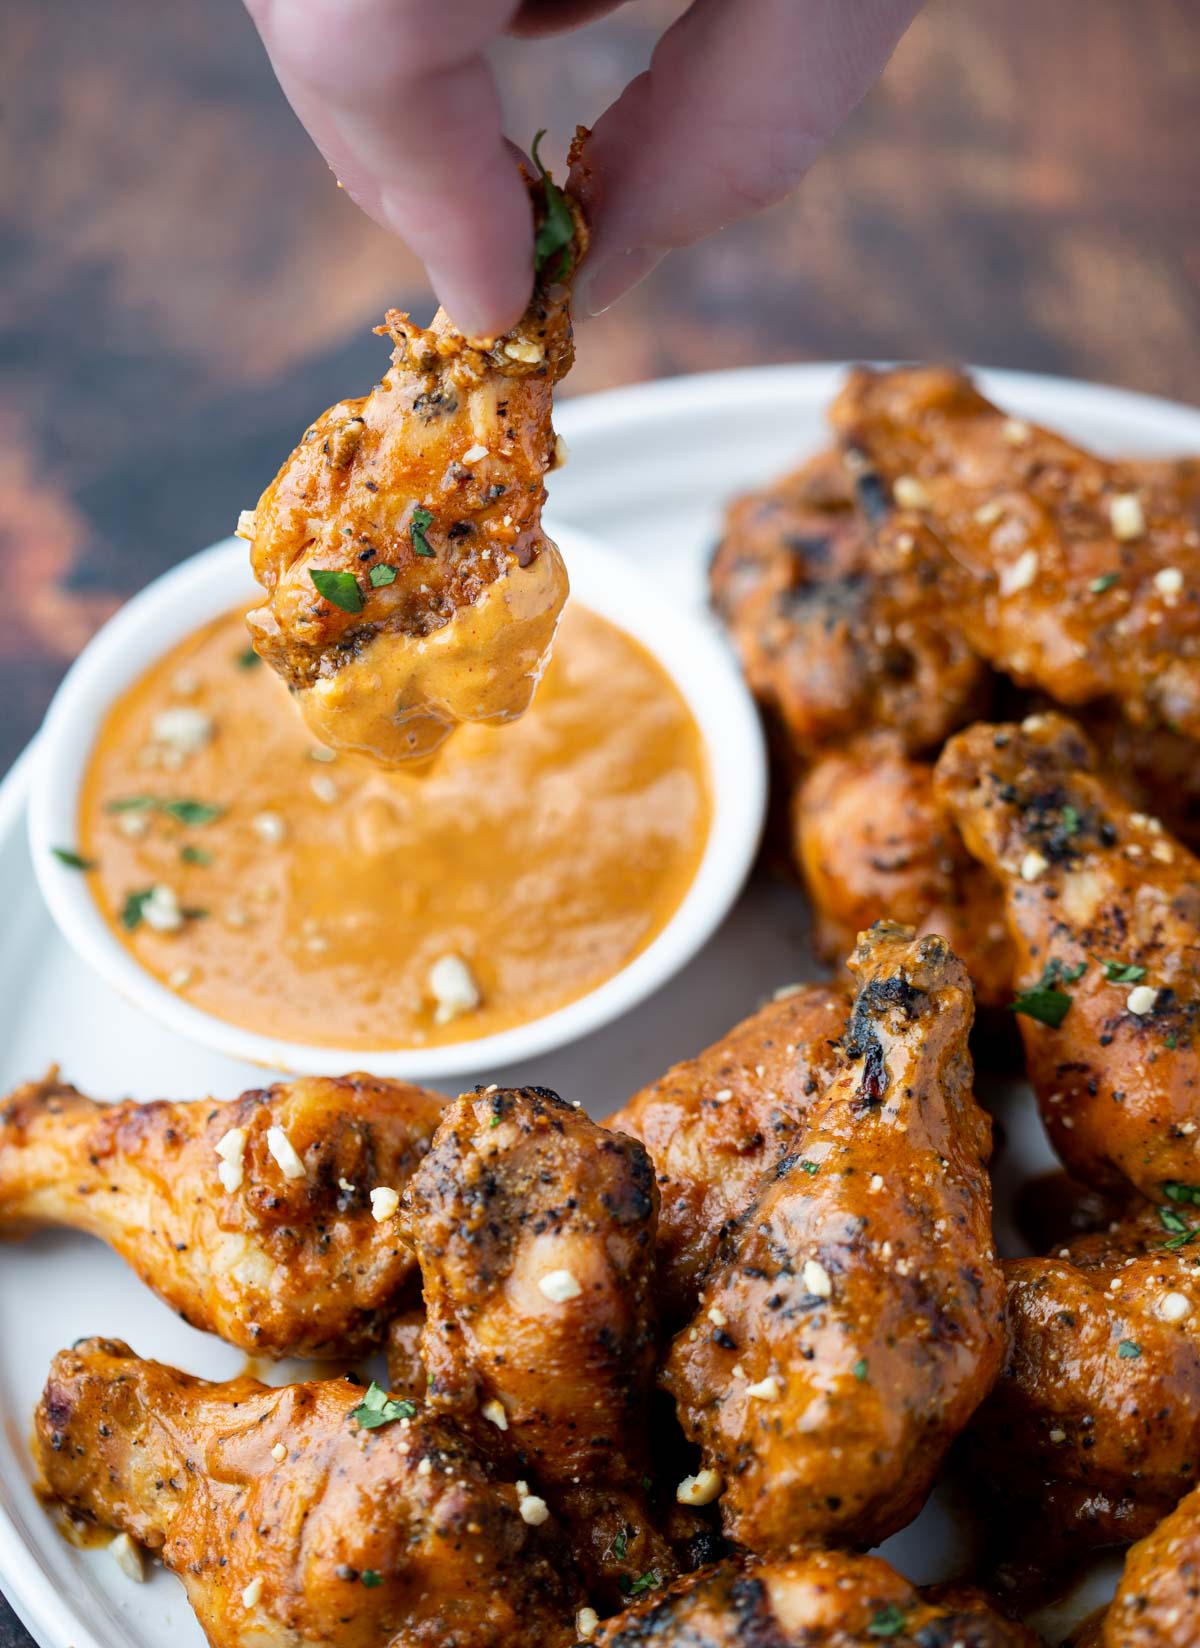 Dipping a Grilled Chicken Wing into a Spicy Peanut dipping sauce